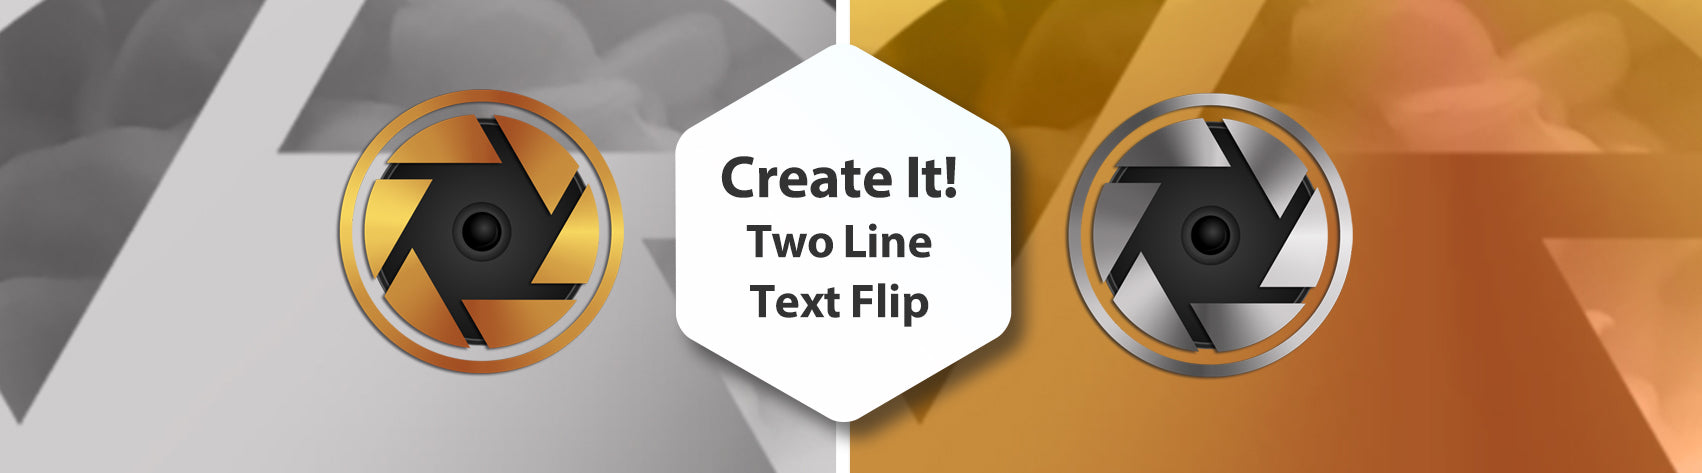 Create It!  Two Line Text Flip